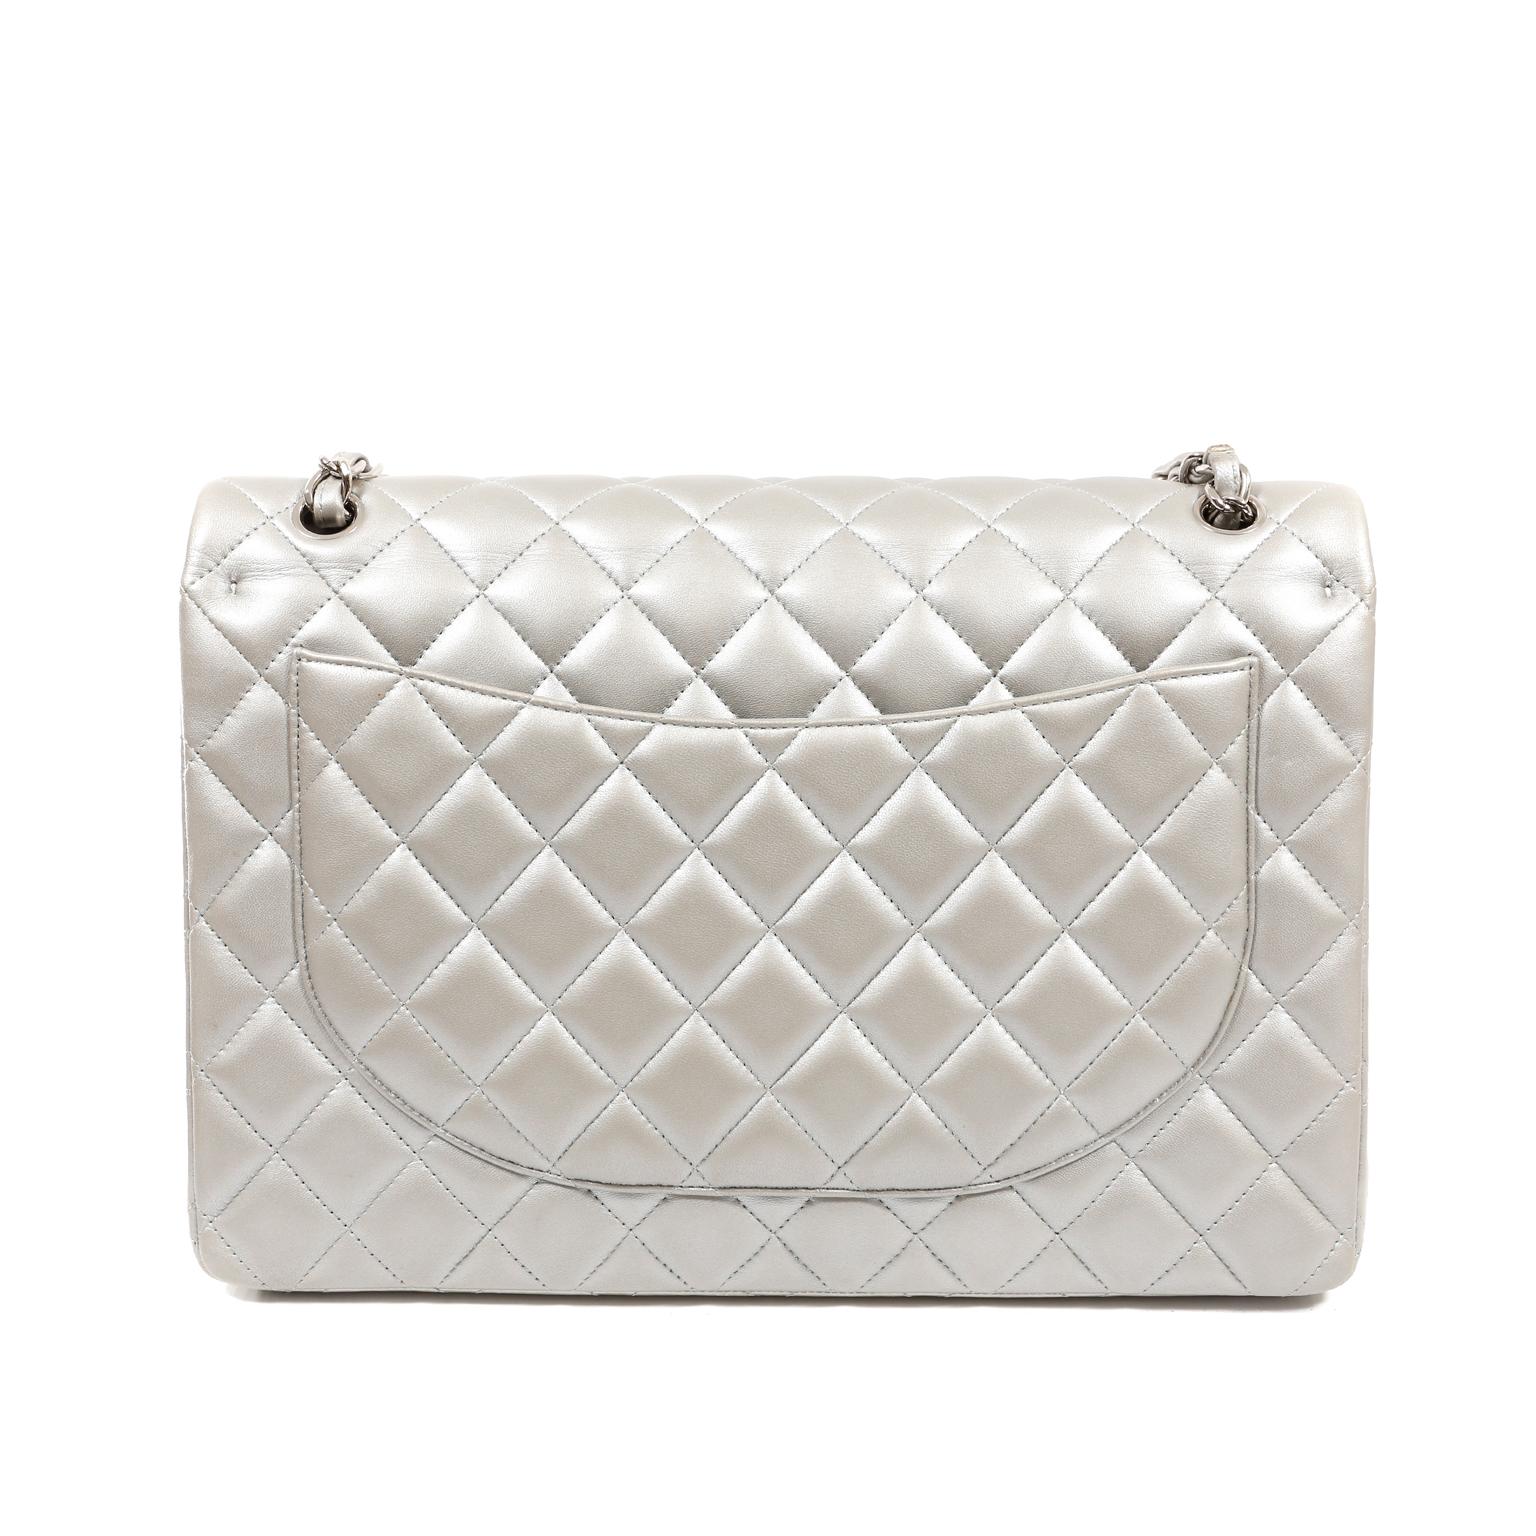 This authentic Chanel Matte Silver Lambskin Maxi Classic Flap is in very good condition.  The matte silver finish makes this Timeless Classic extra glamorous.  
Muted silver lambskin is quilted in signature Chanel diamond pattern.  Silver